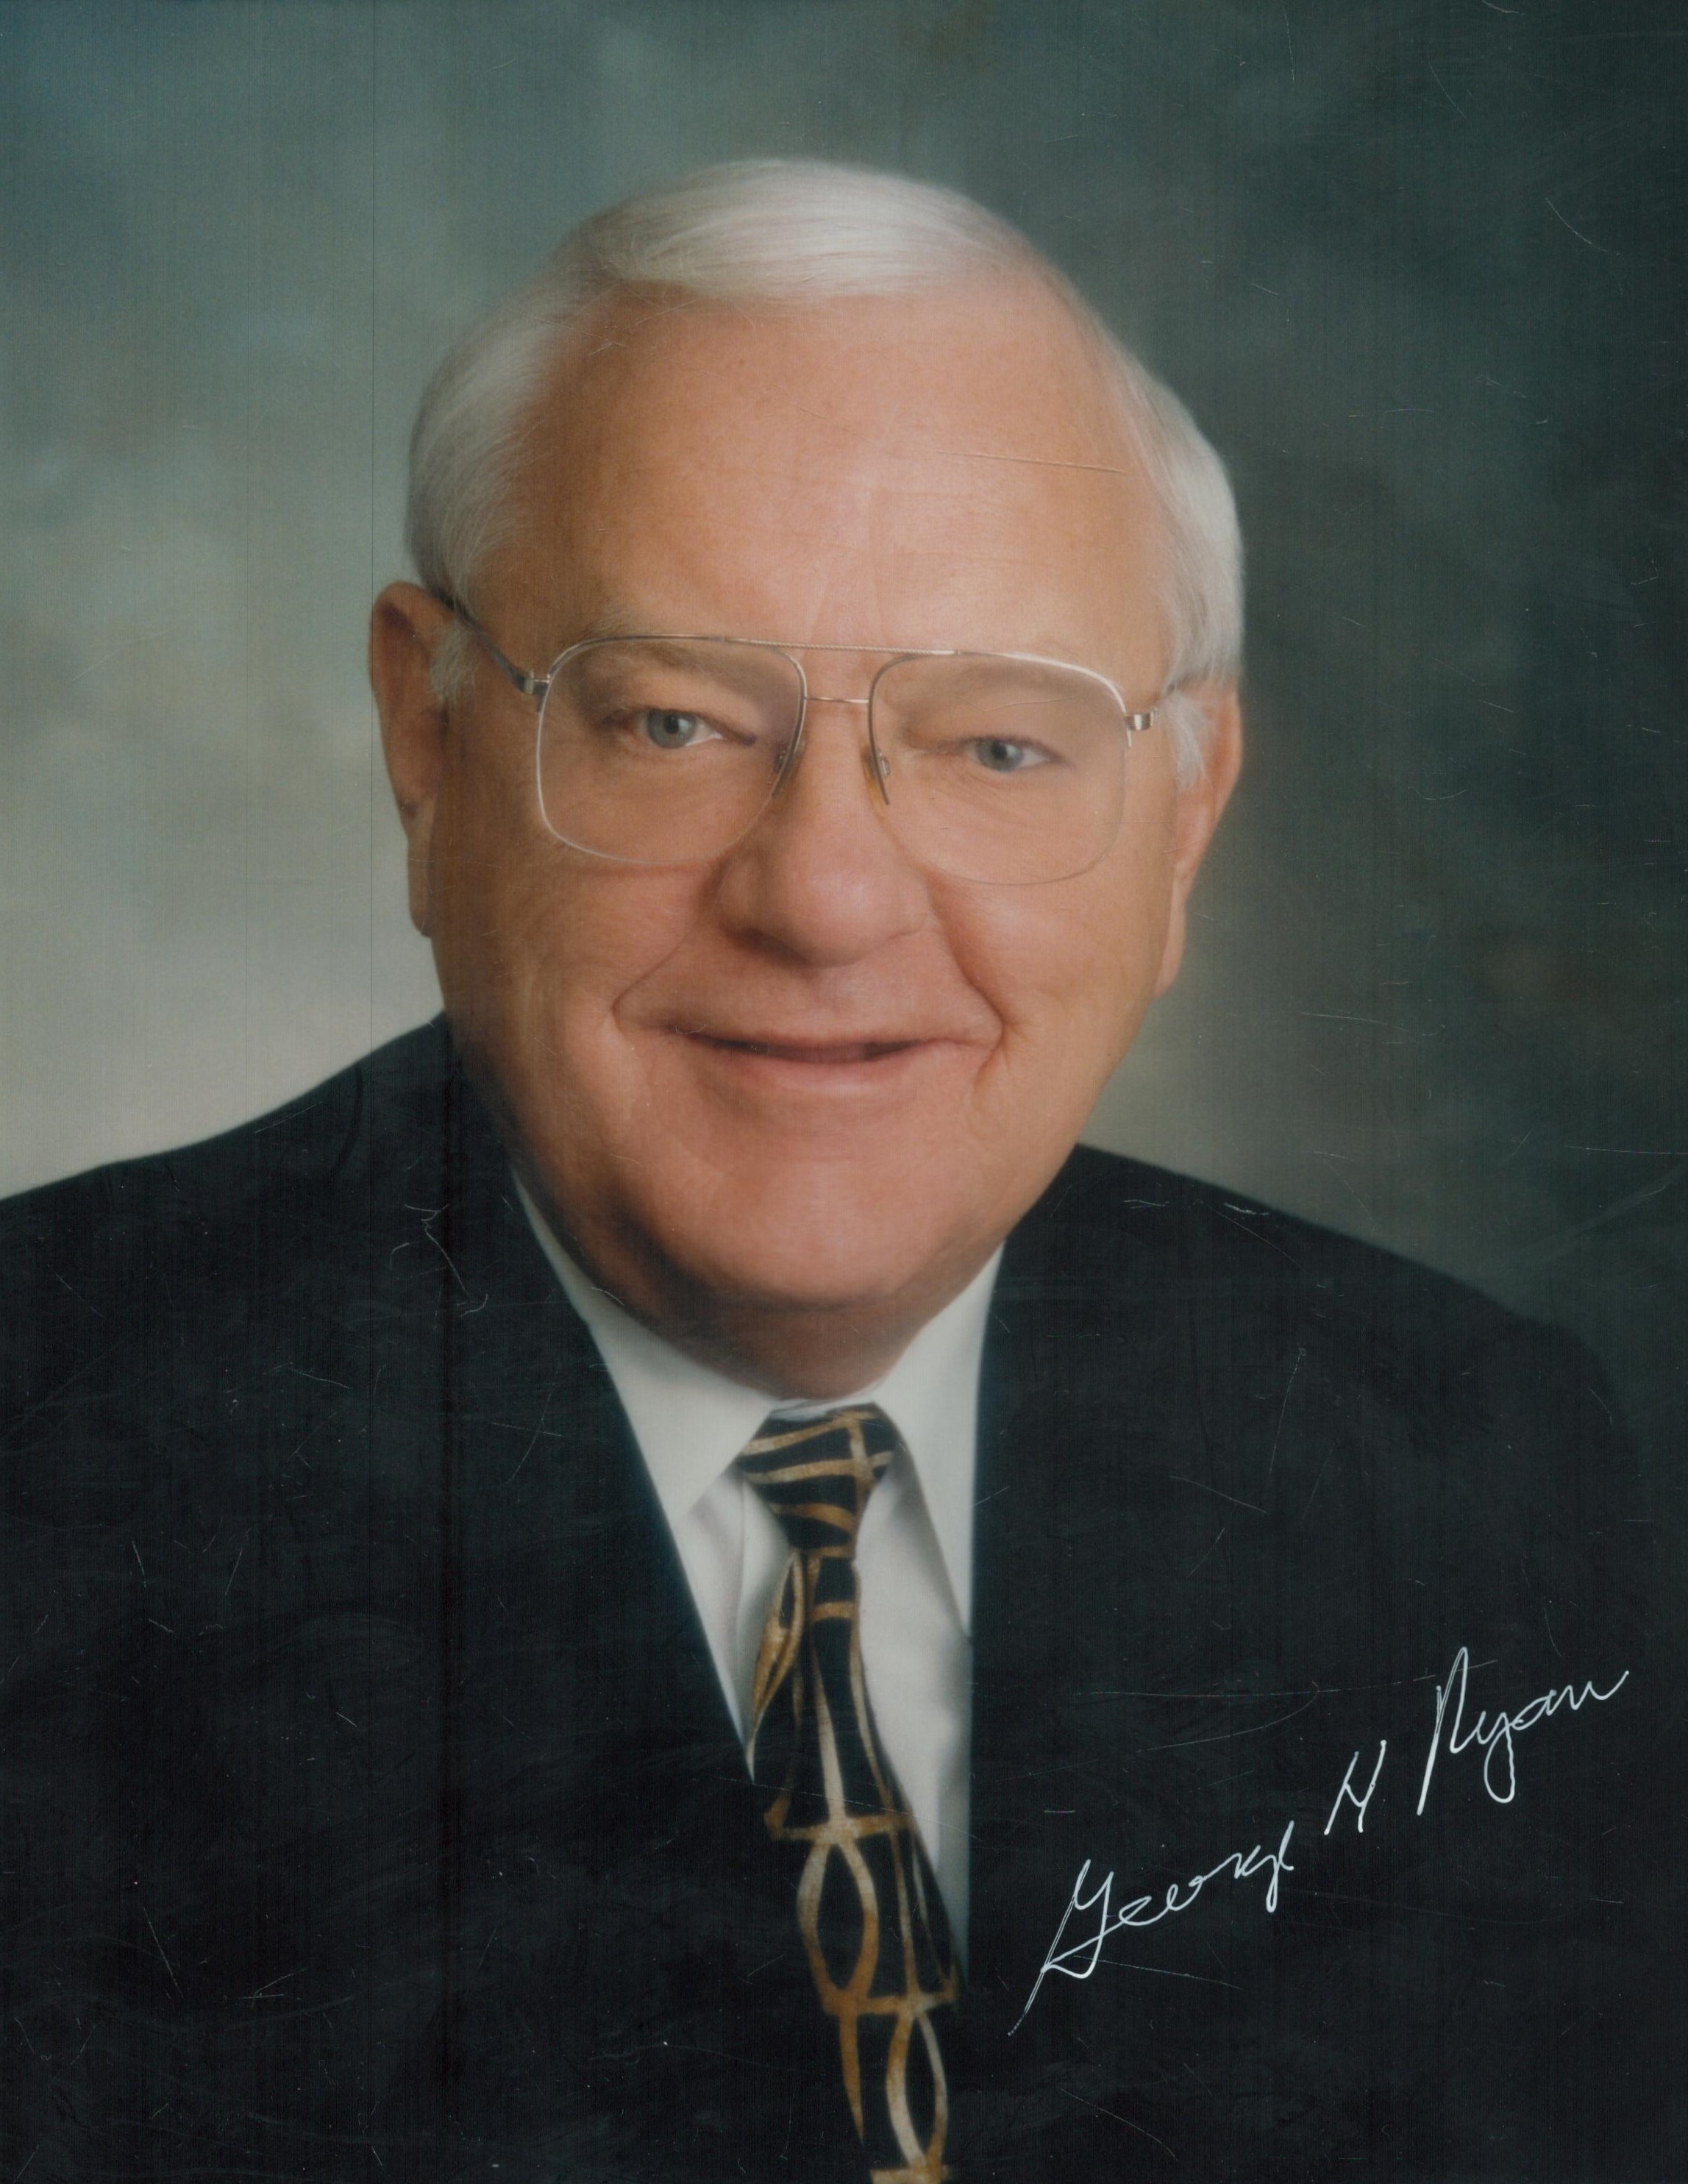 George Ryan signed colour photo 10x8 Inch. Is an American former politician who served as the 39th